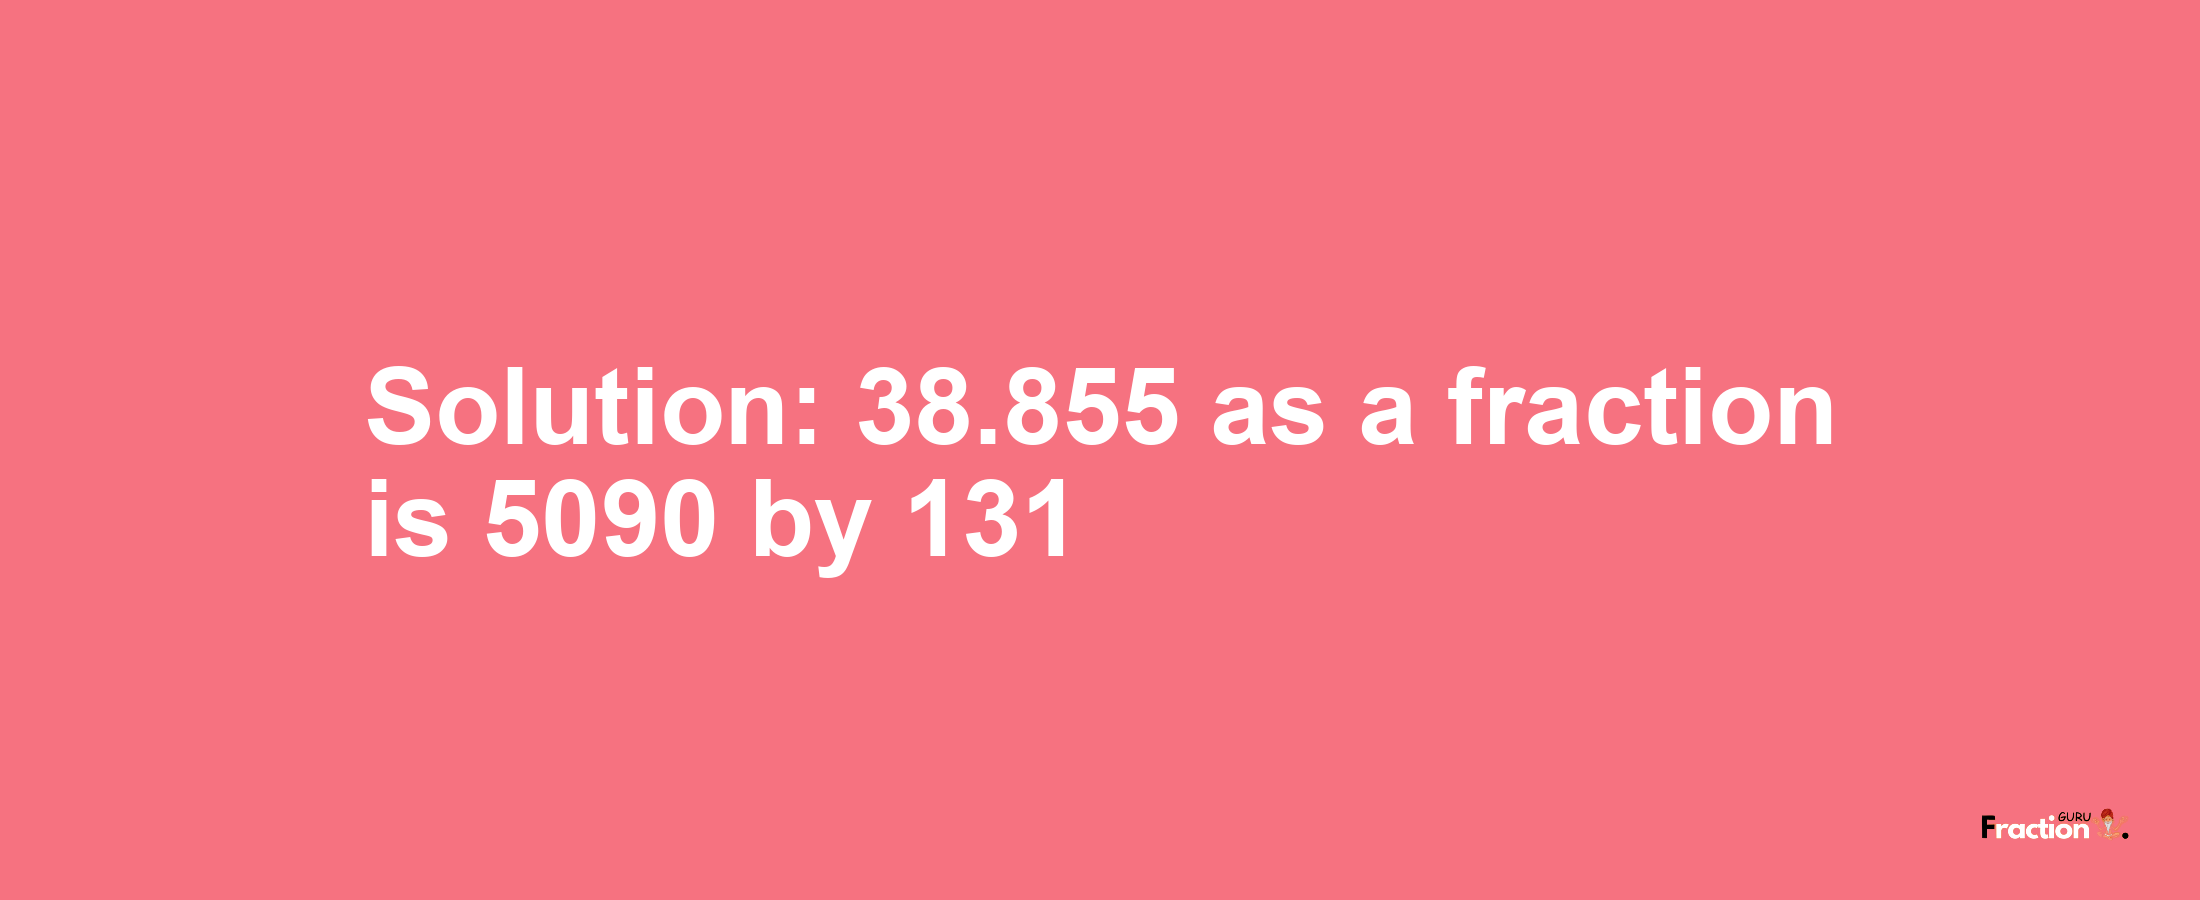 Solution:38.855 as a fraction is 5090/131